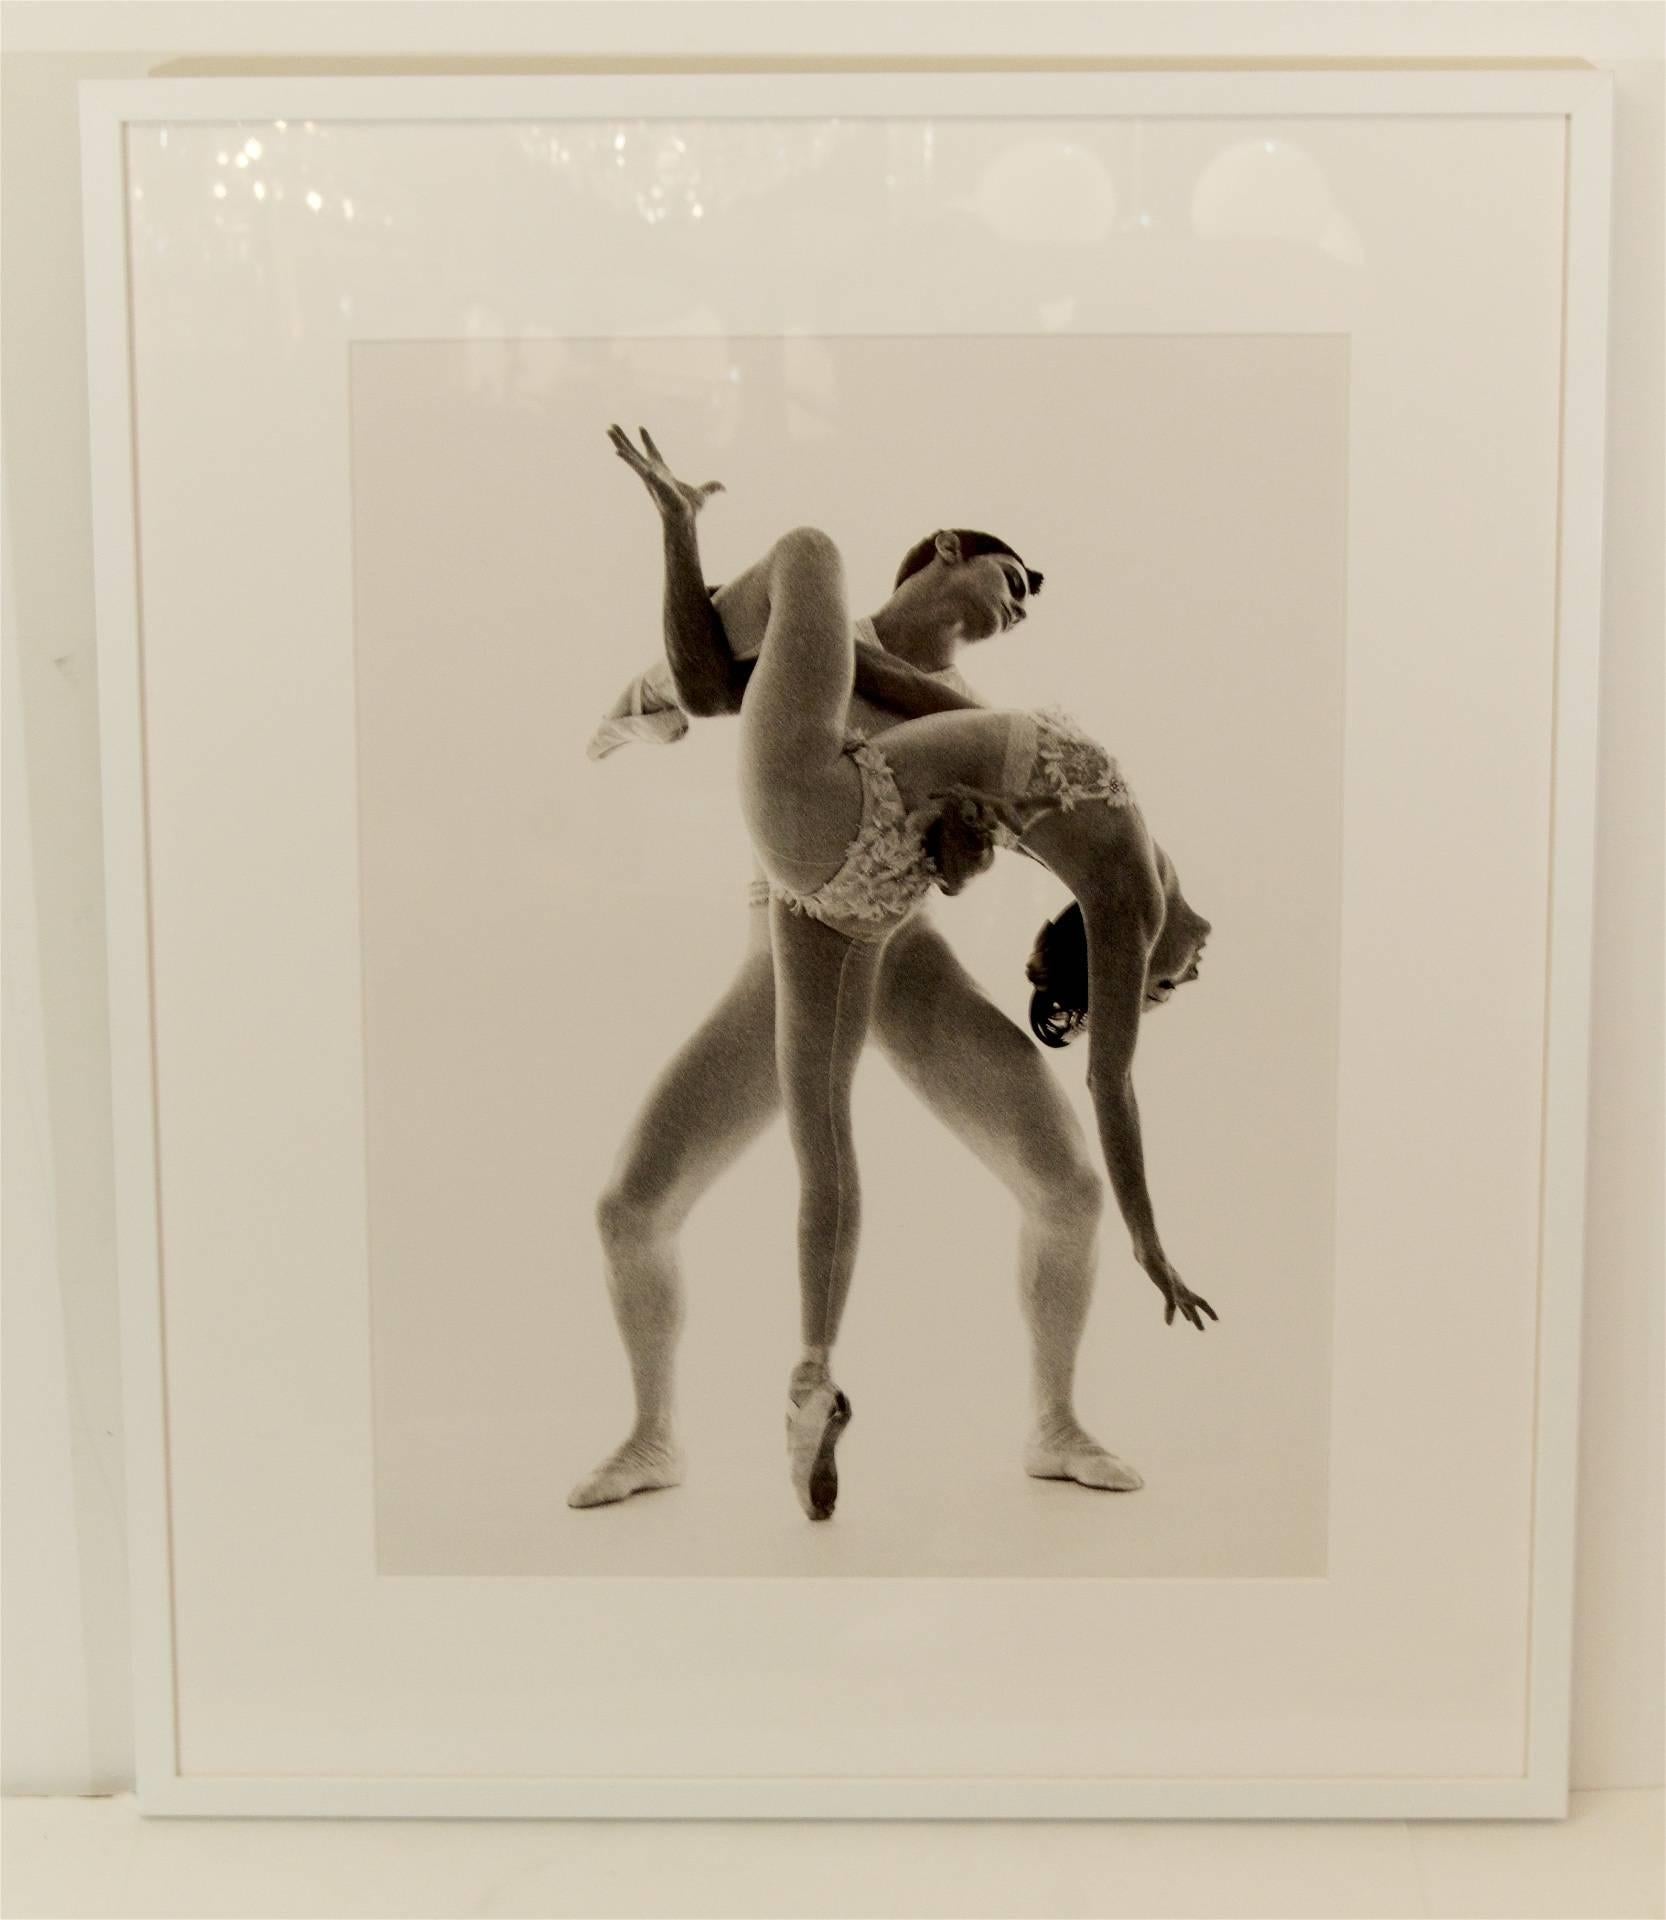 Allegra Kent and Edward Villella photograph by Bert Stern. Stamped on back.

Silver gelatin print. New archival framing.